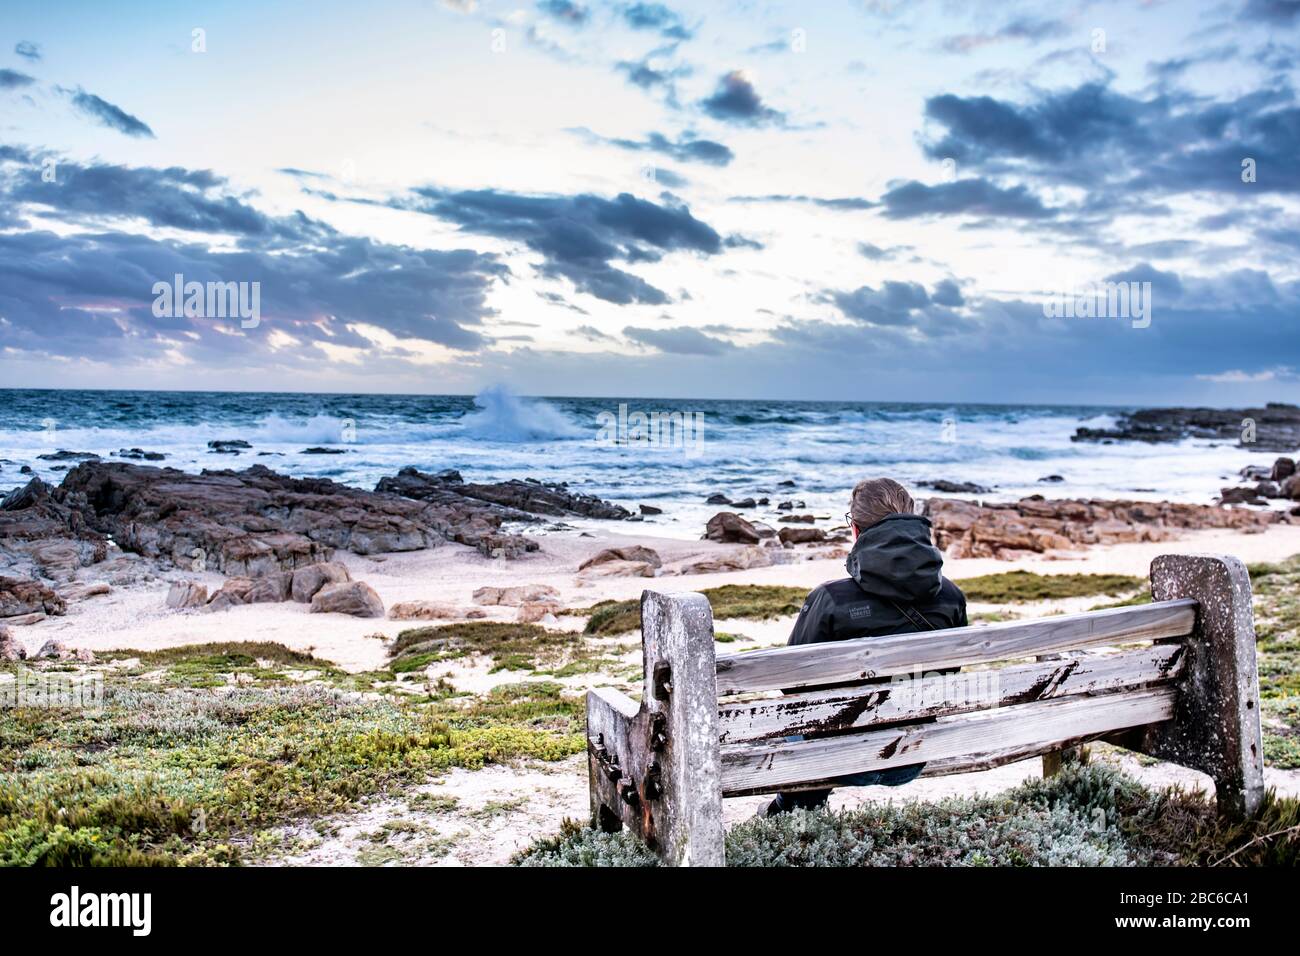 South Africa, Cape St Francis, Sun going down, over the Indian Ocean and the waves are pounding on the Rocks, while sitting there. Stock Photo